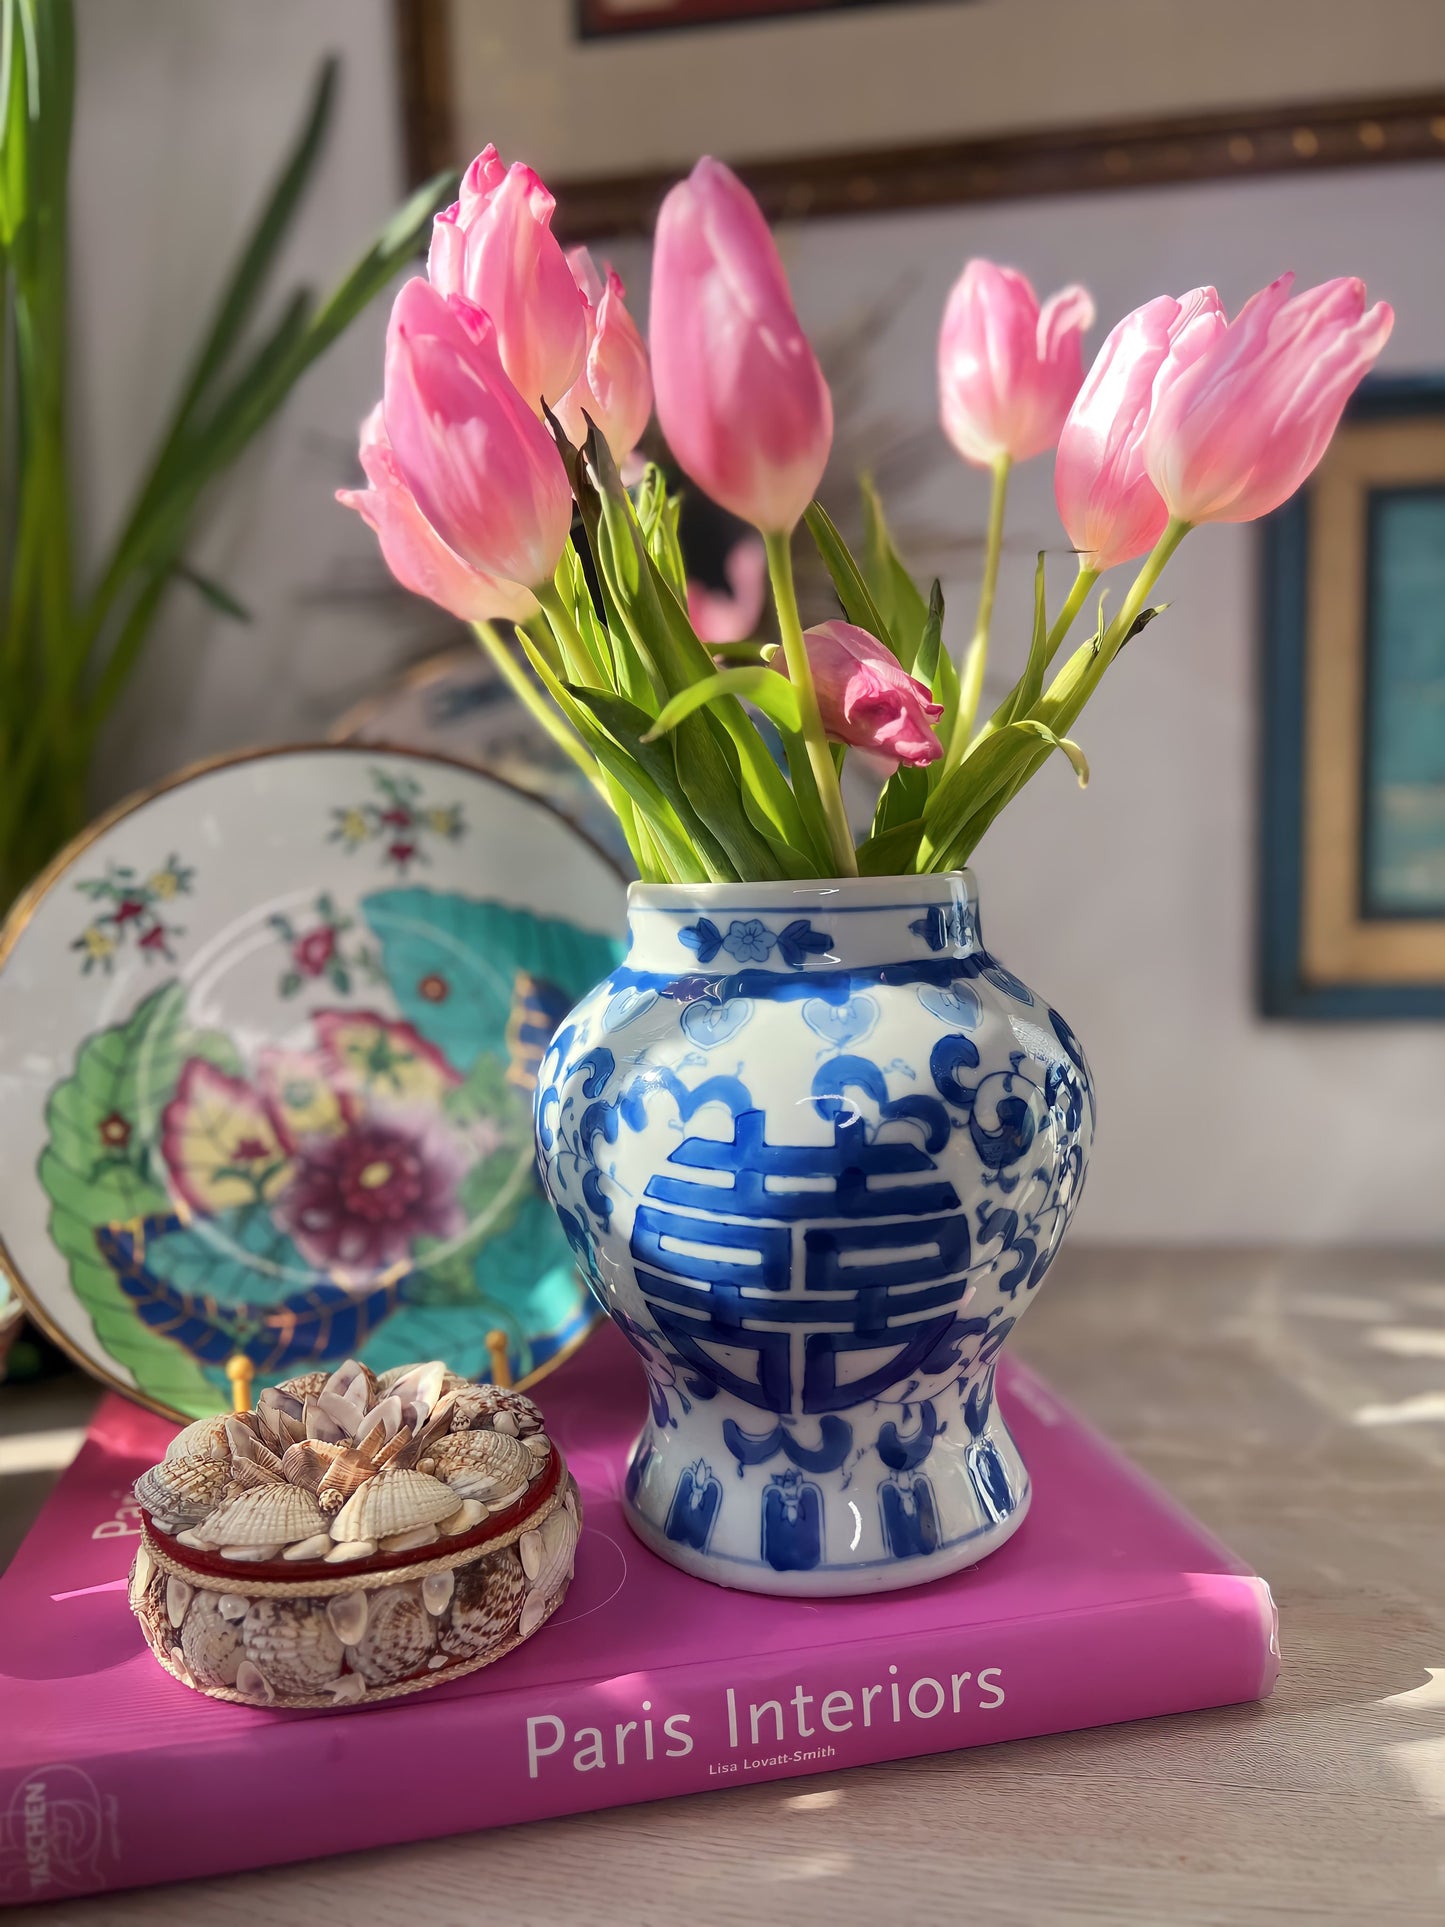 Classic Blue and White Chinoiserie Vase